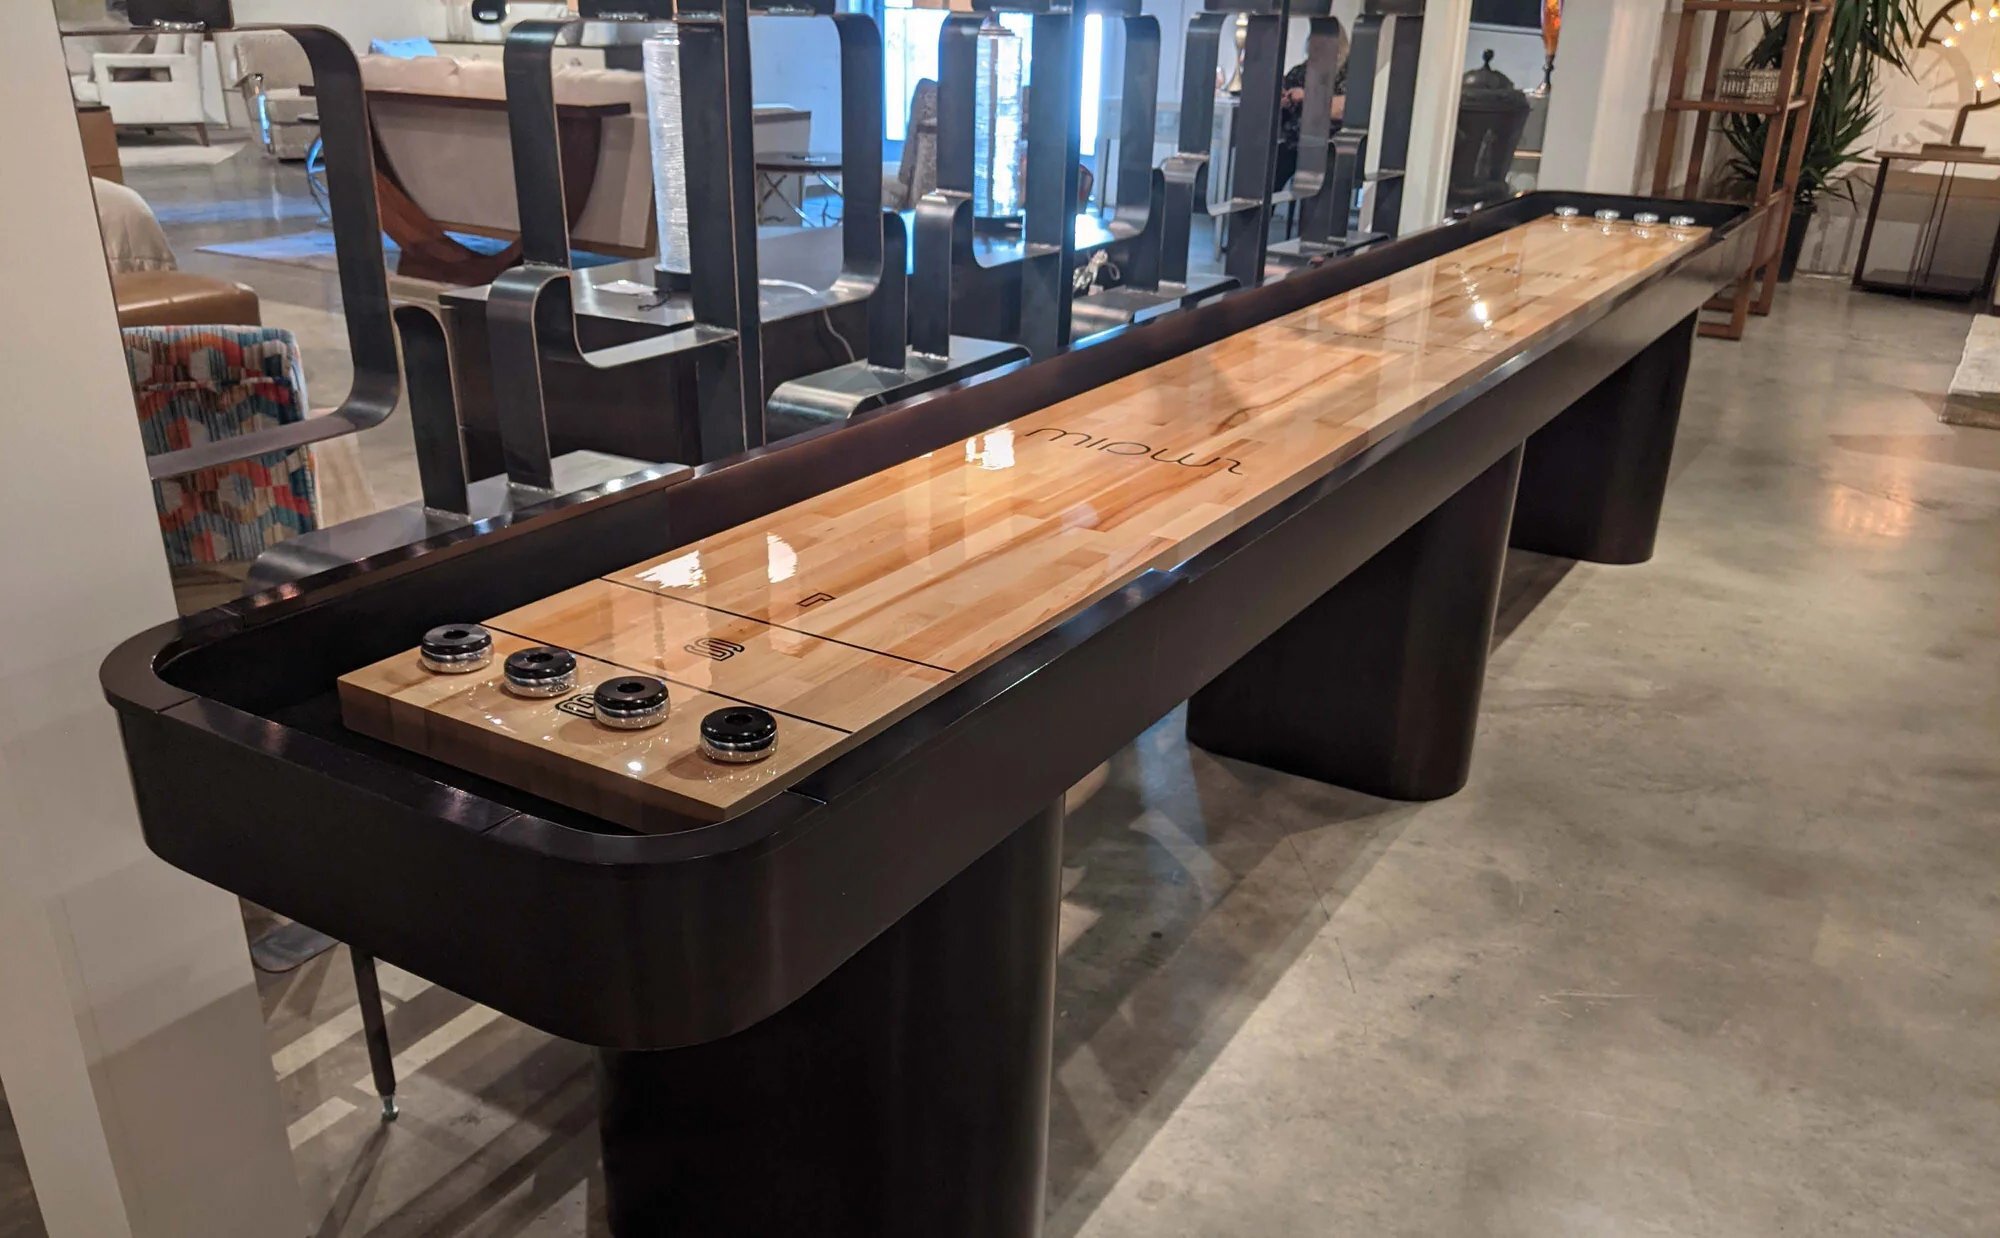 DIY Shuffleboard Table: Step-by-Step Guide To Building Your Own